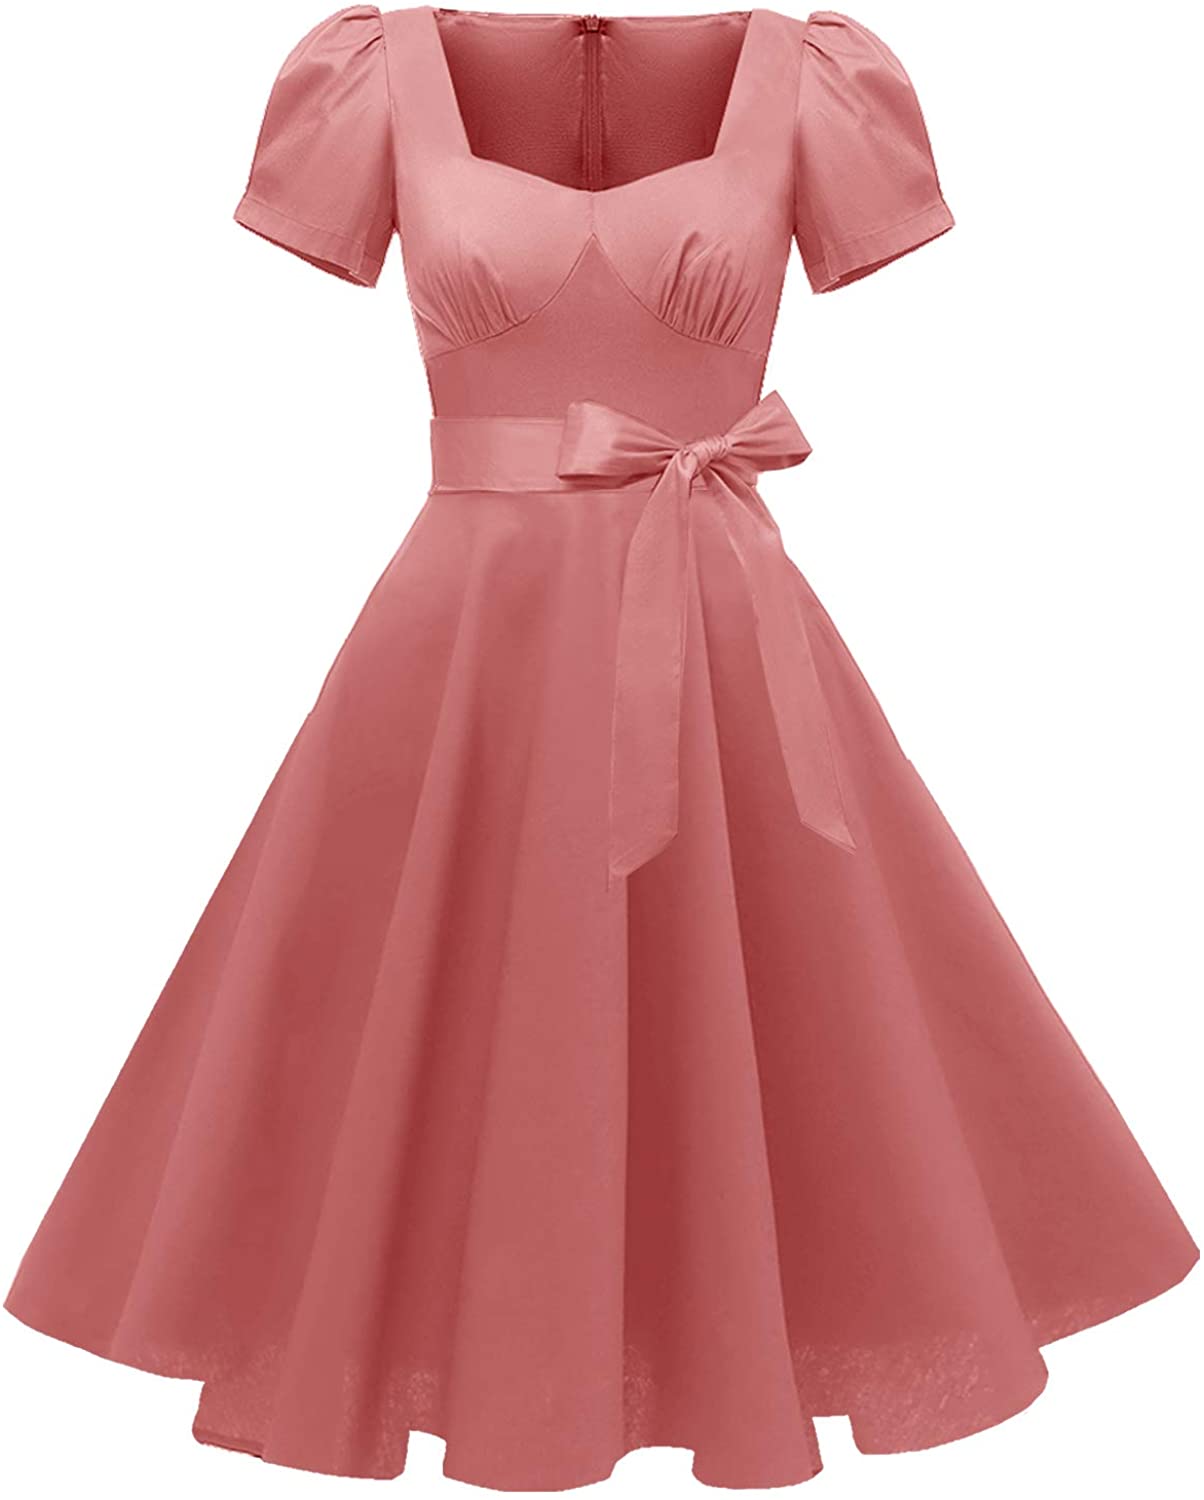 GOOBGS Women's 1950s Vintage Puff Sleeves Cocktail Rockabilly Swing Retro Dress with Pockets 